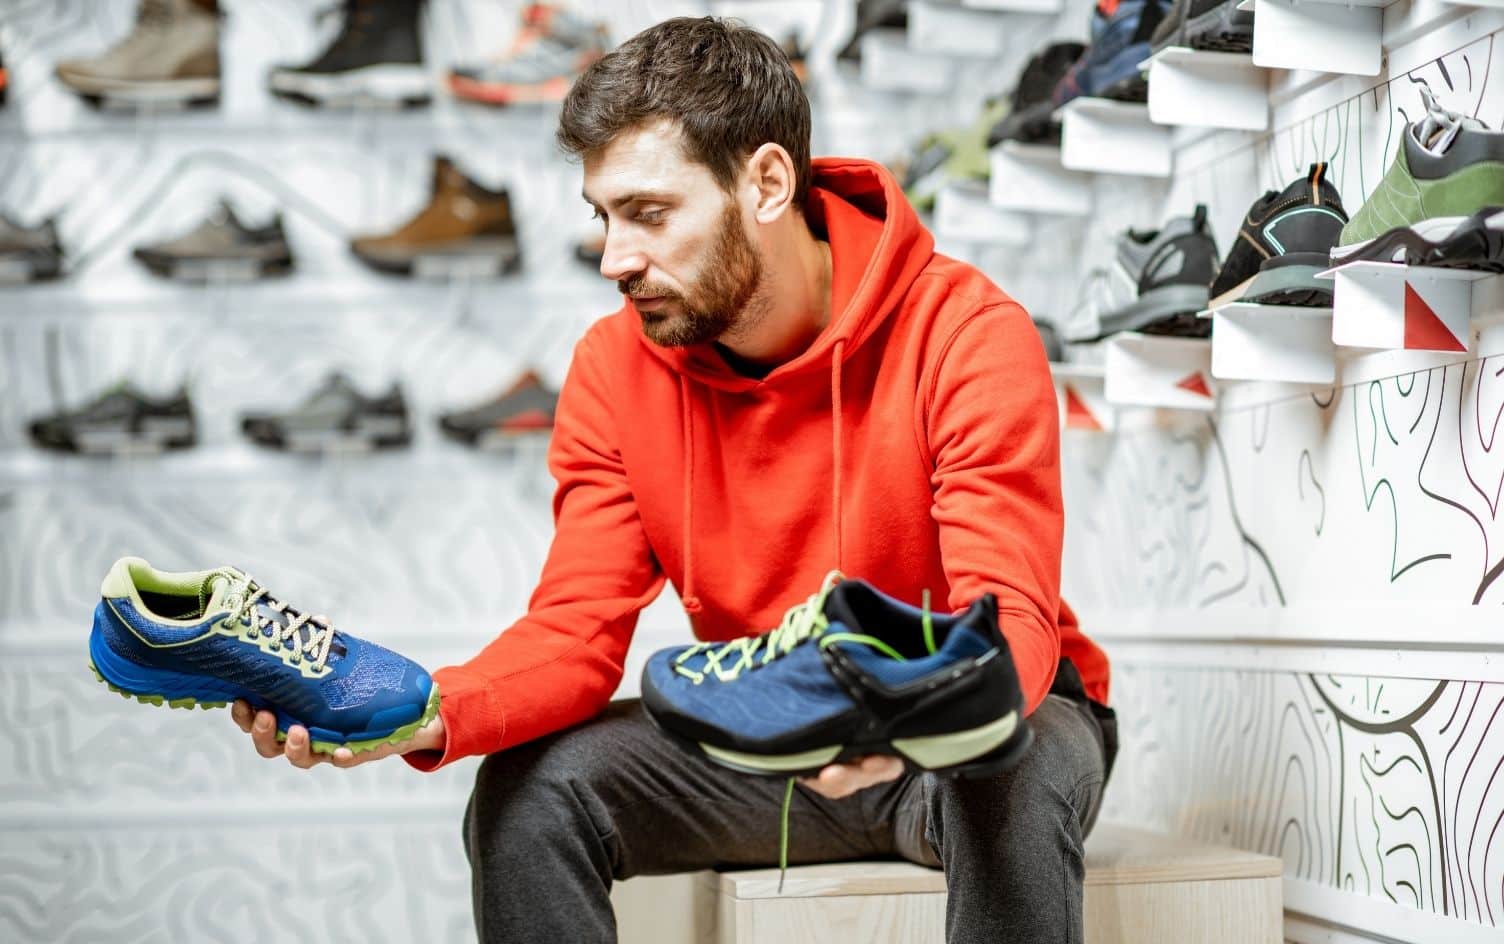 How to Shop For the Best Running or Walking Shoe | Fitness MyFitnessPal